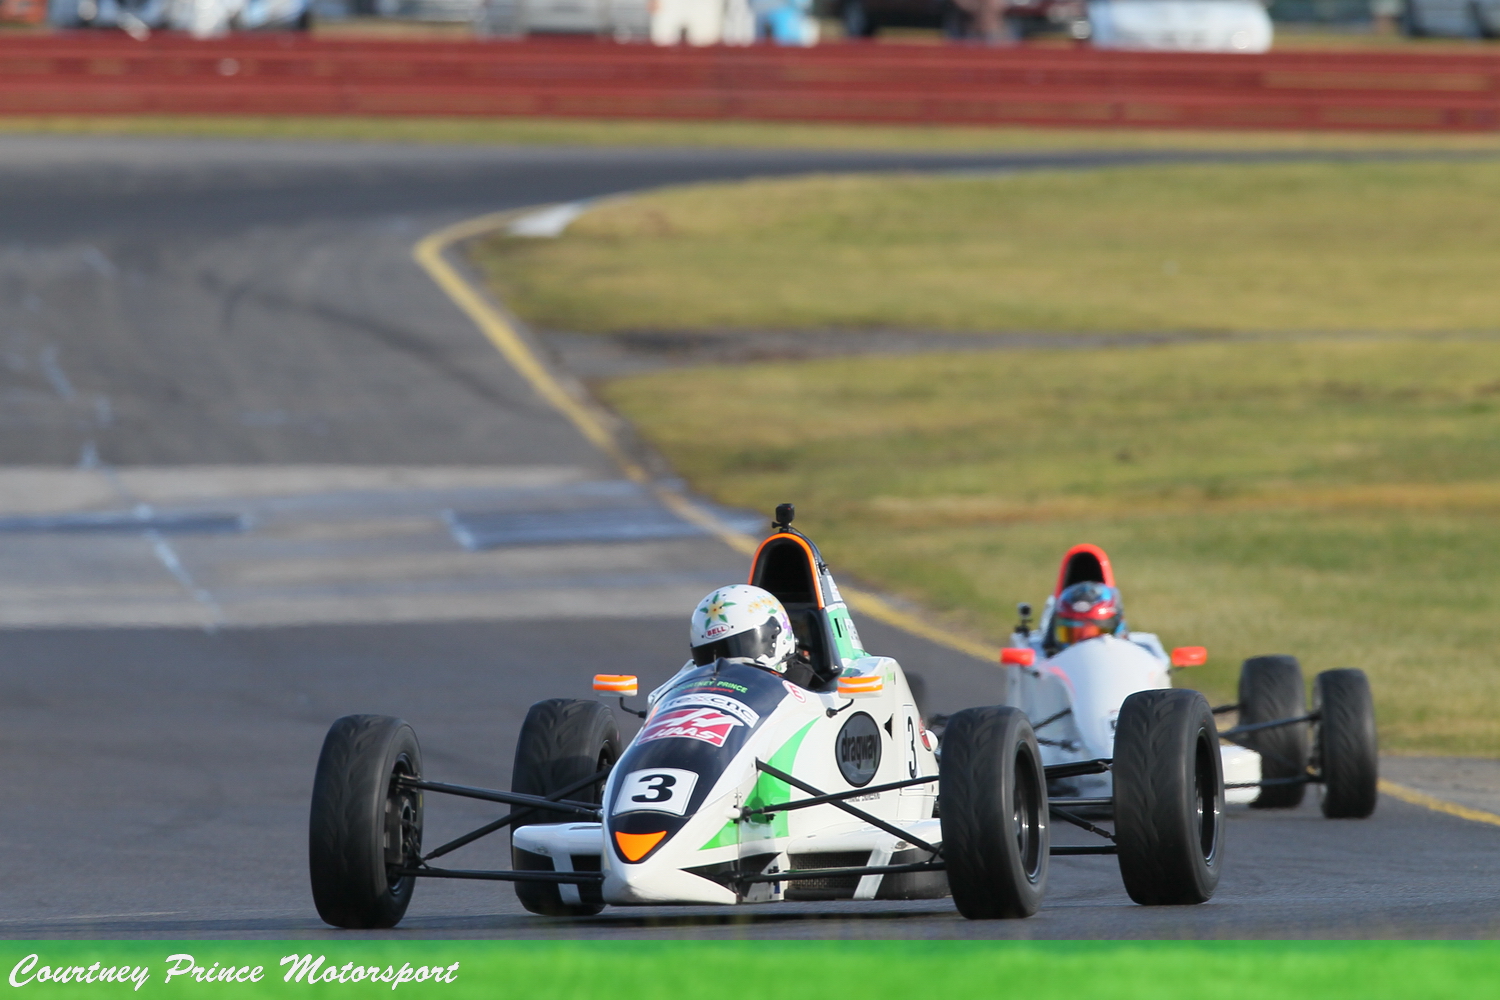 Courtney Prince at Sandown. For the Vic State Finals, July 2017.